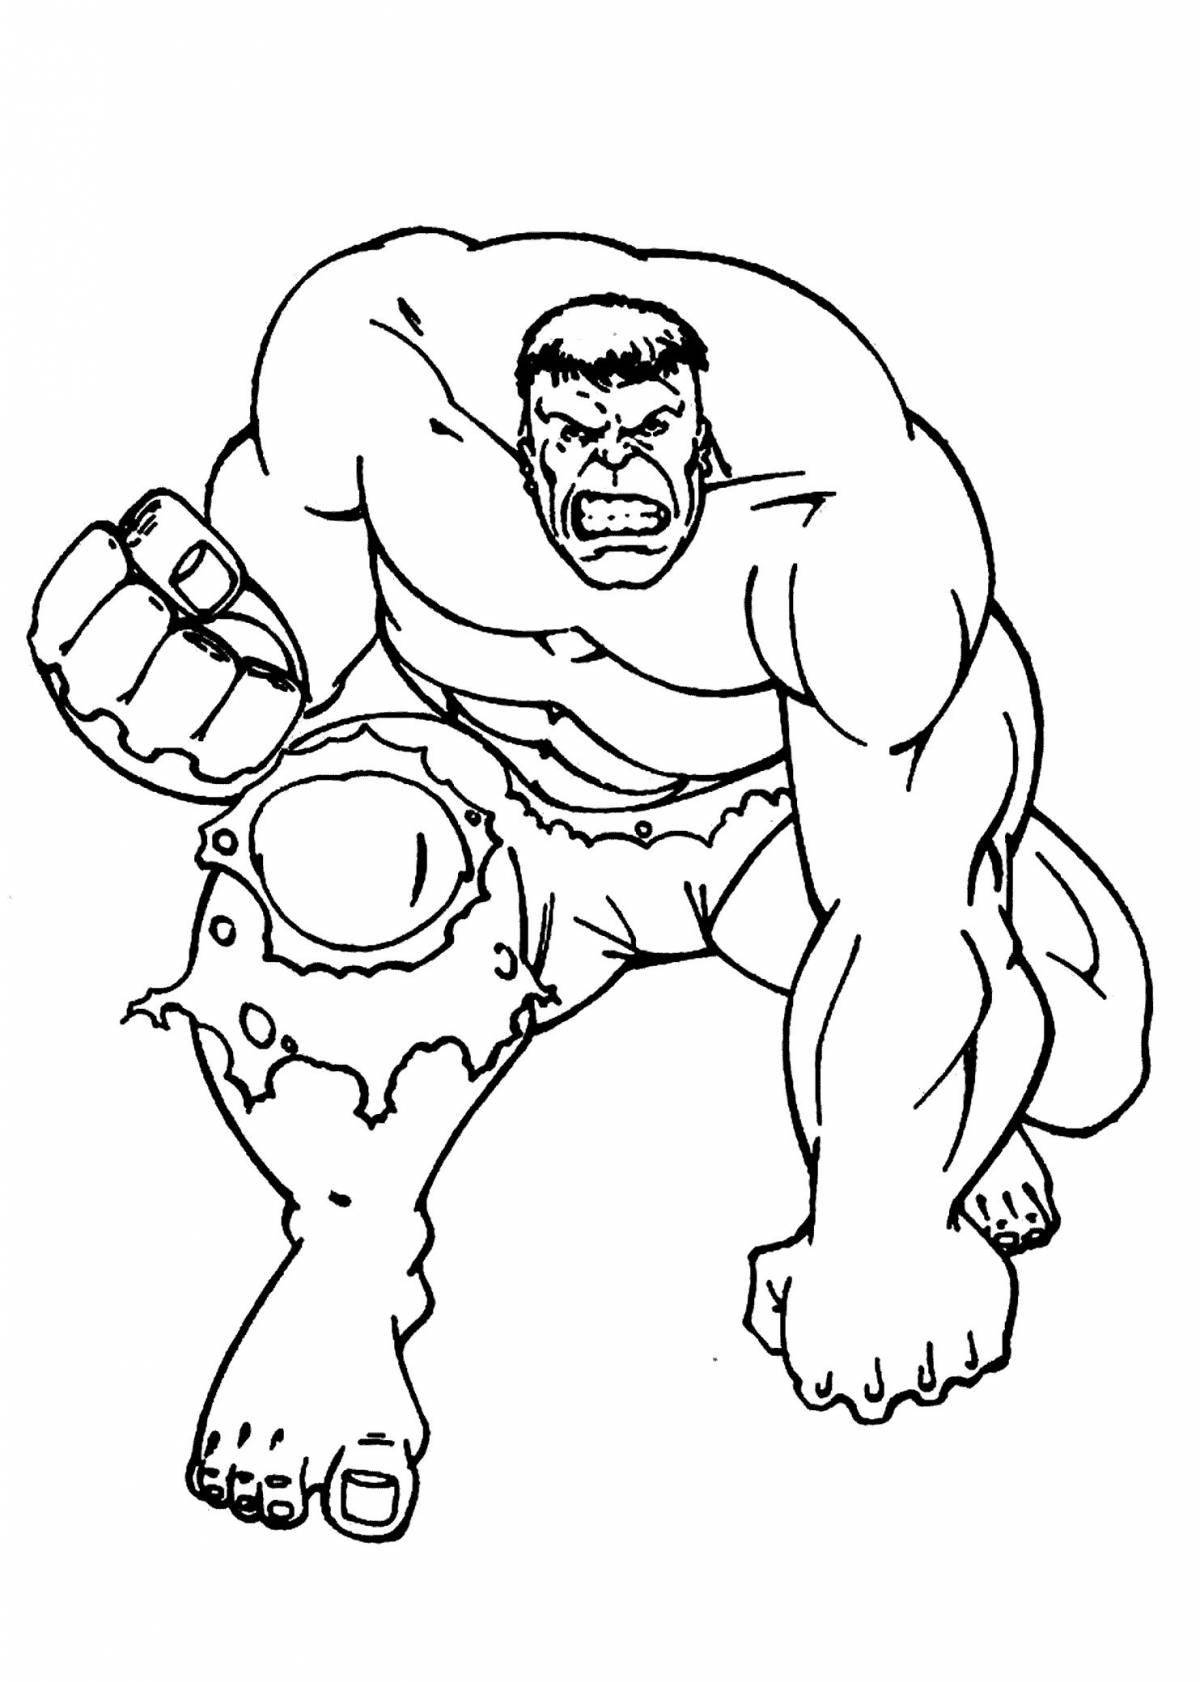 Amazing hulk coloring book for boys